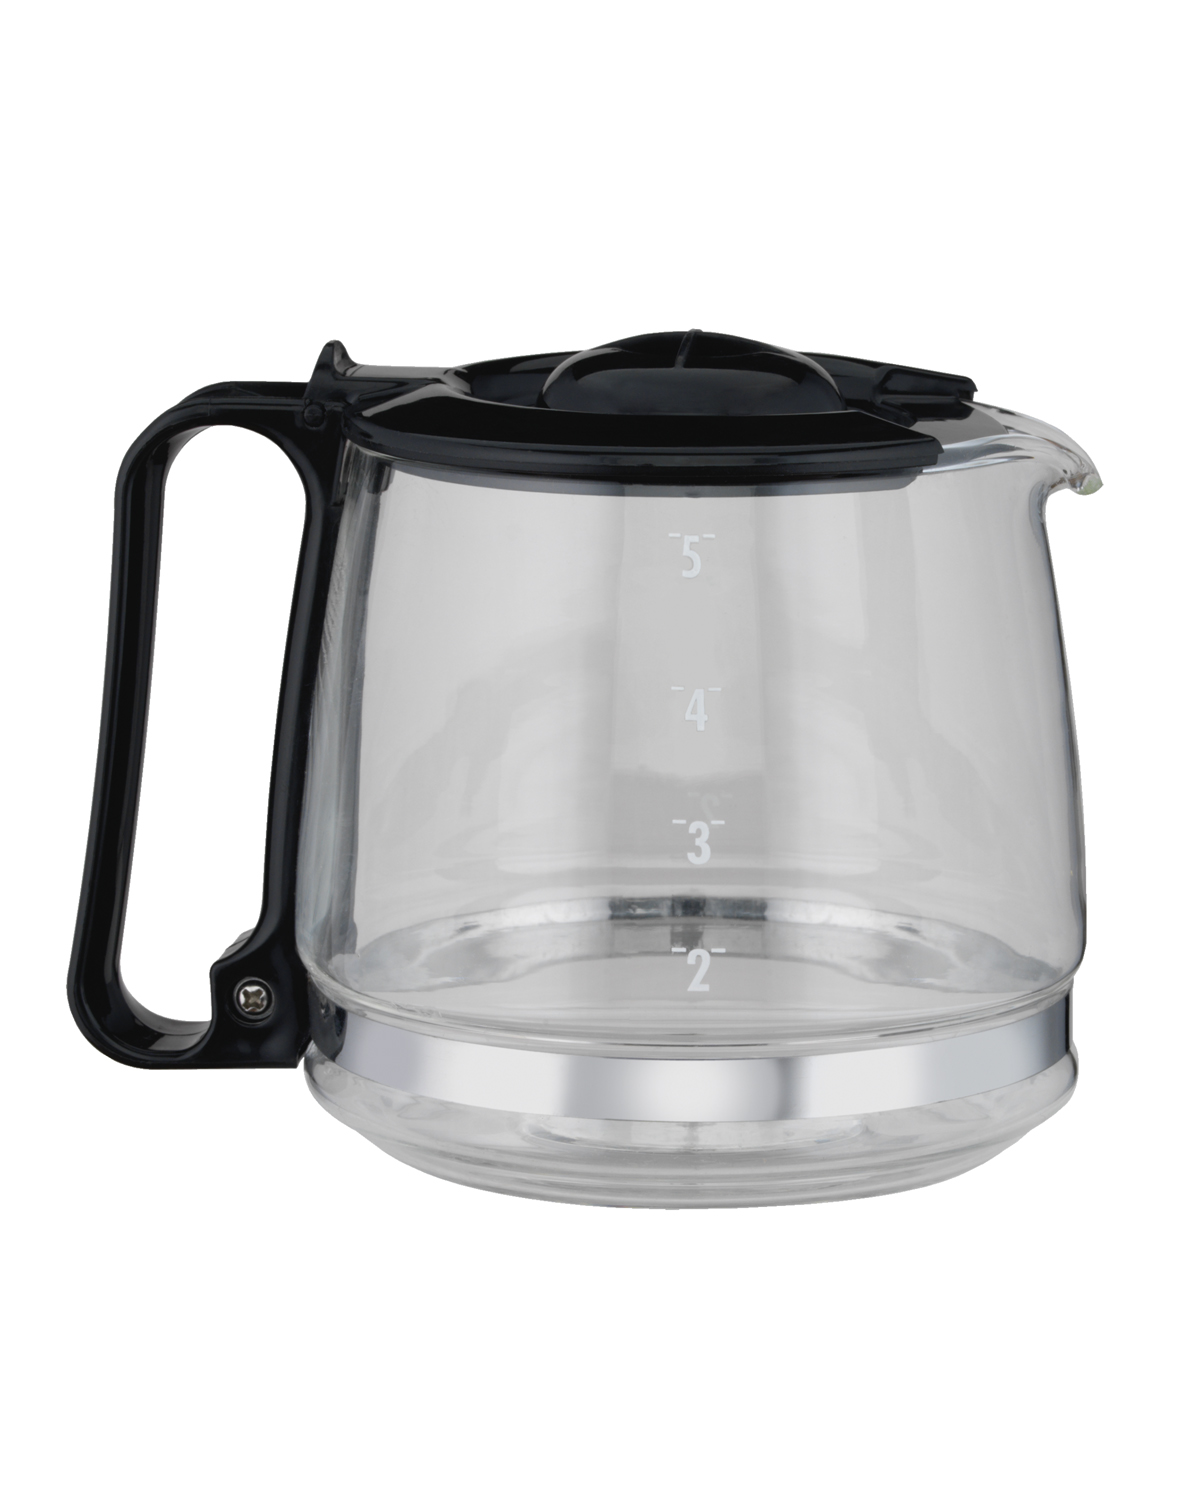 Hamilton Beach 46310 coffee maker 12-cup Glass Carafe replacement